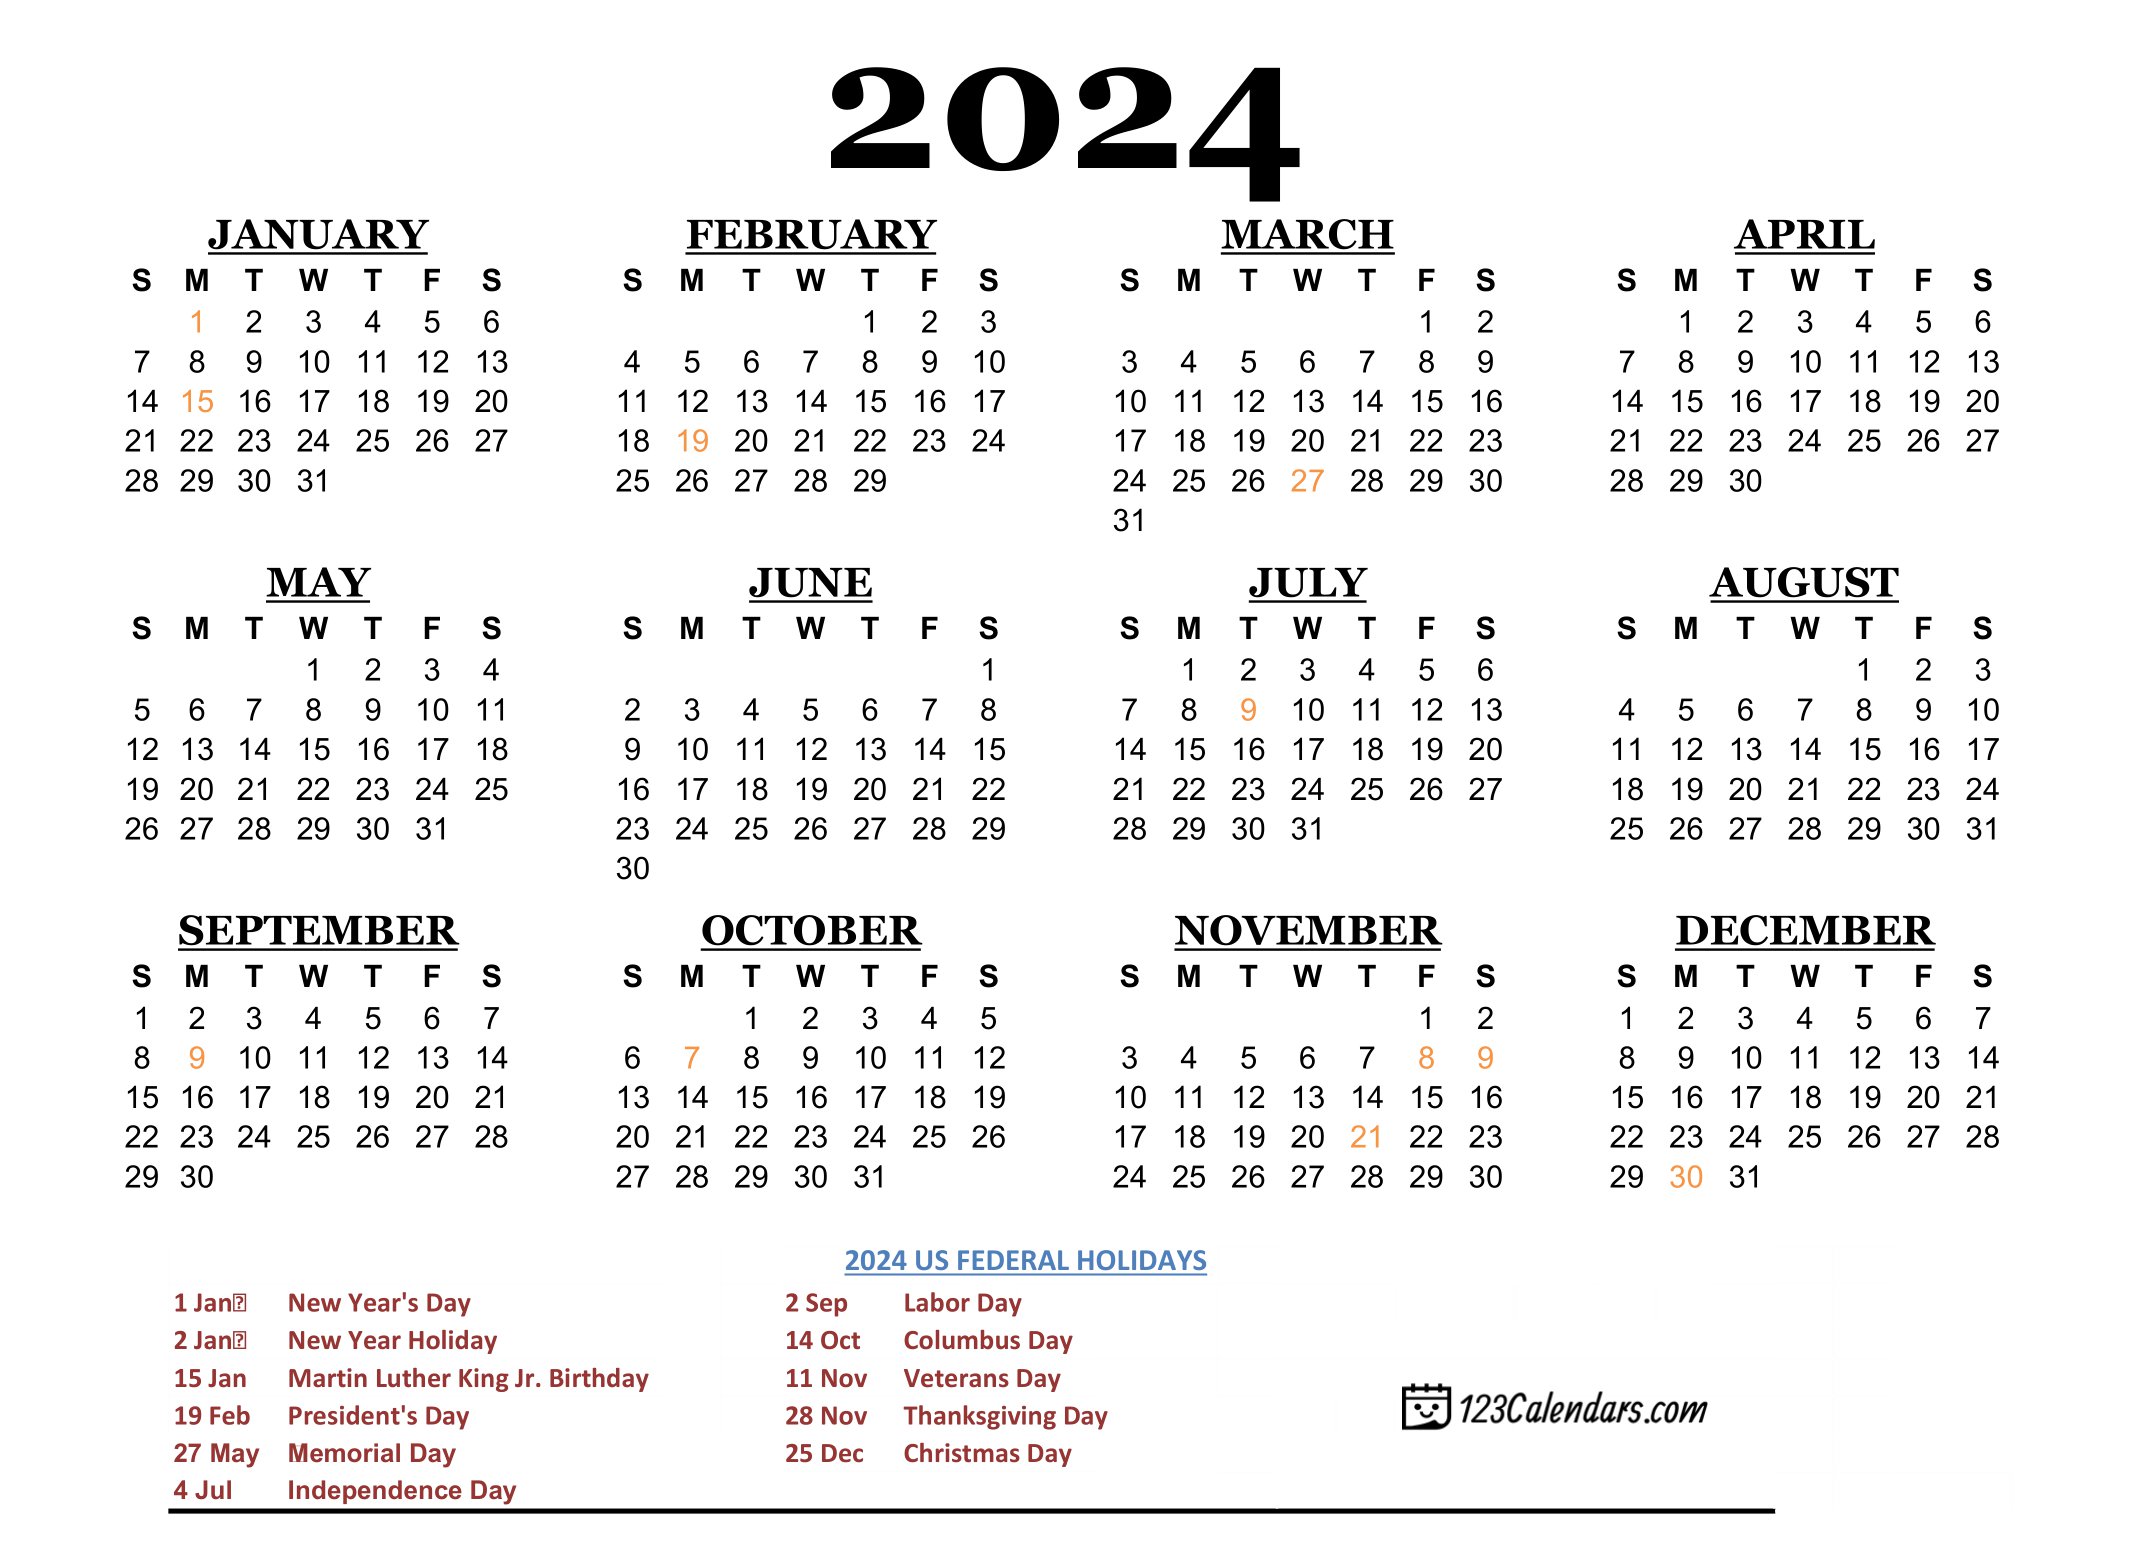 Ready to mark your calendar for 2024? Dates for holidays, events